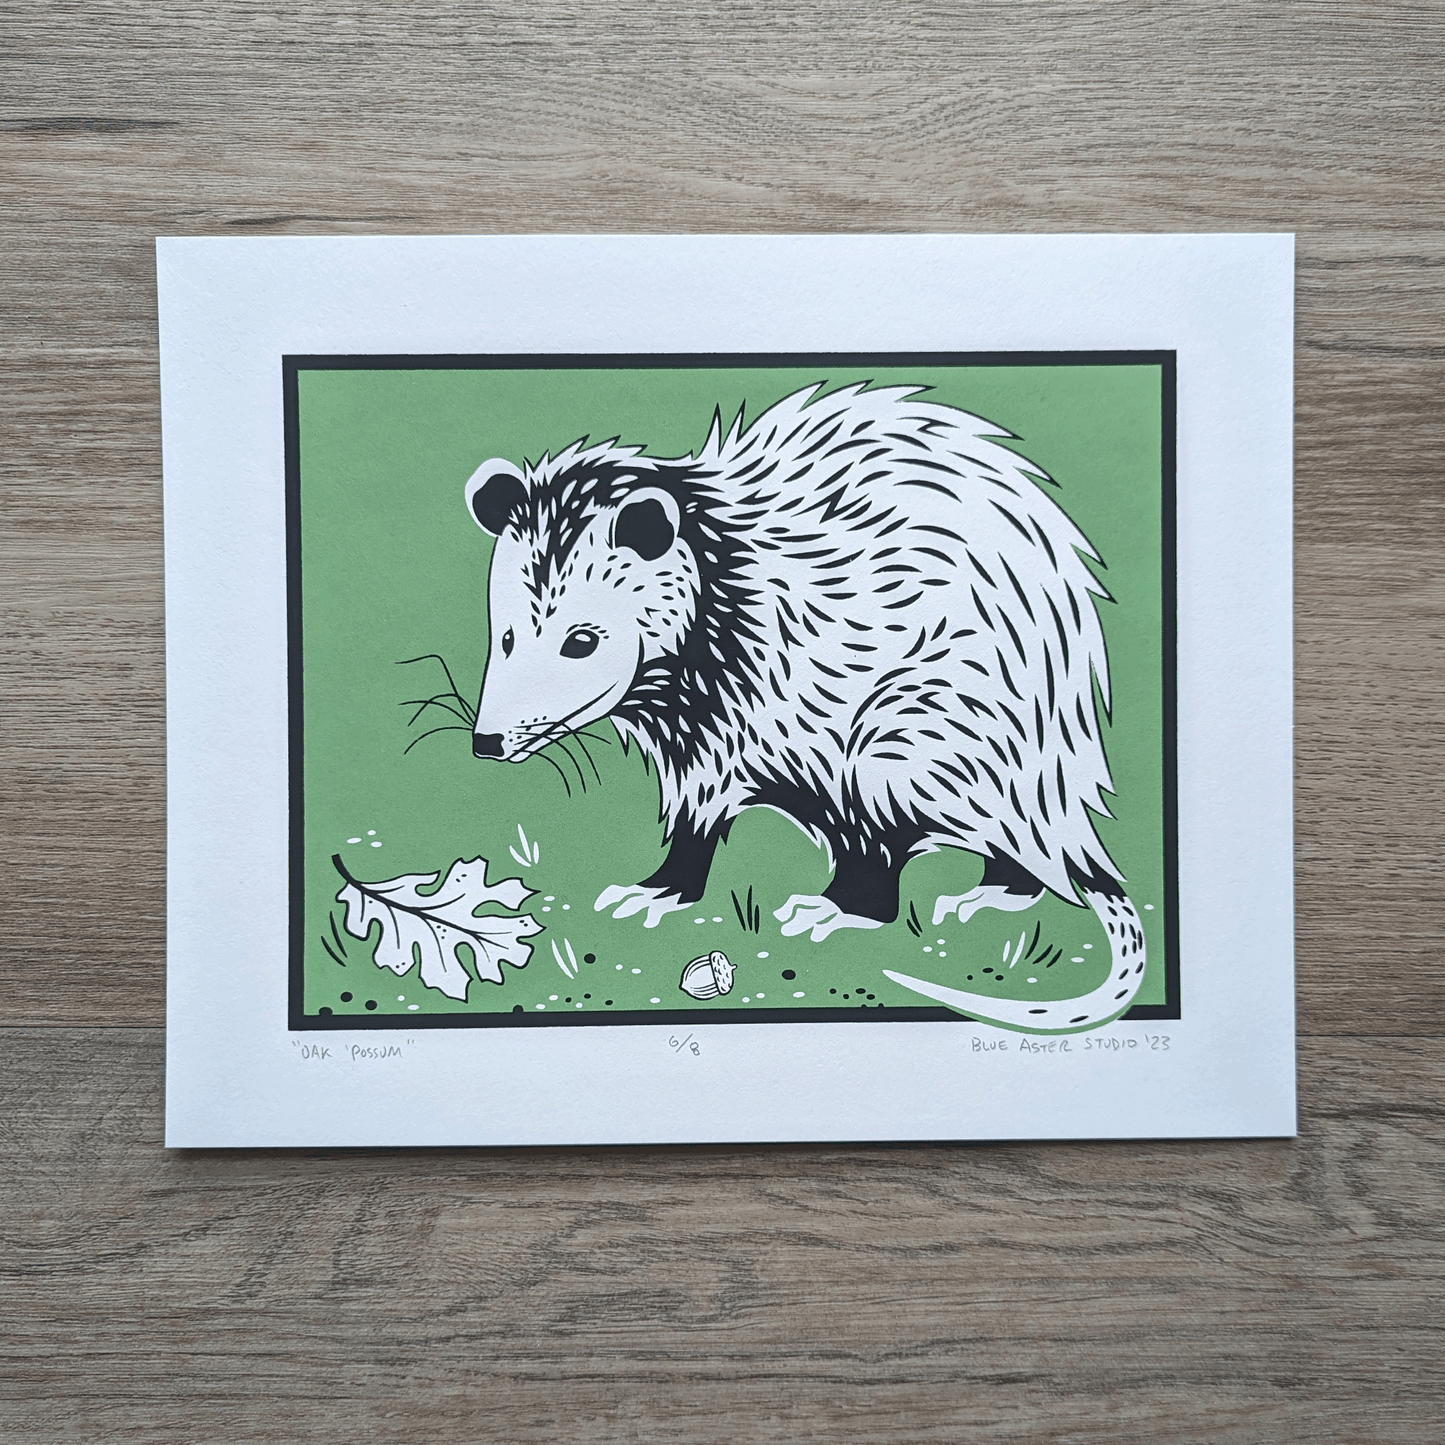 Screen printed art on 8x10 paper. An opossum stands against a green background with an oak leaf and acorn lying near it.